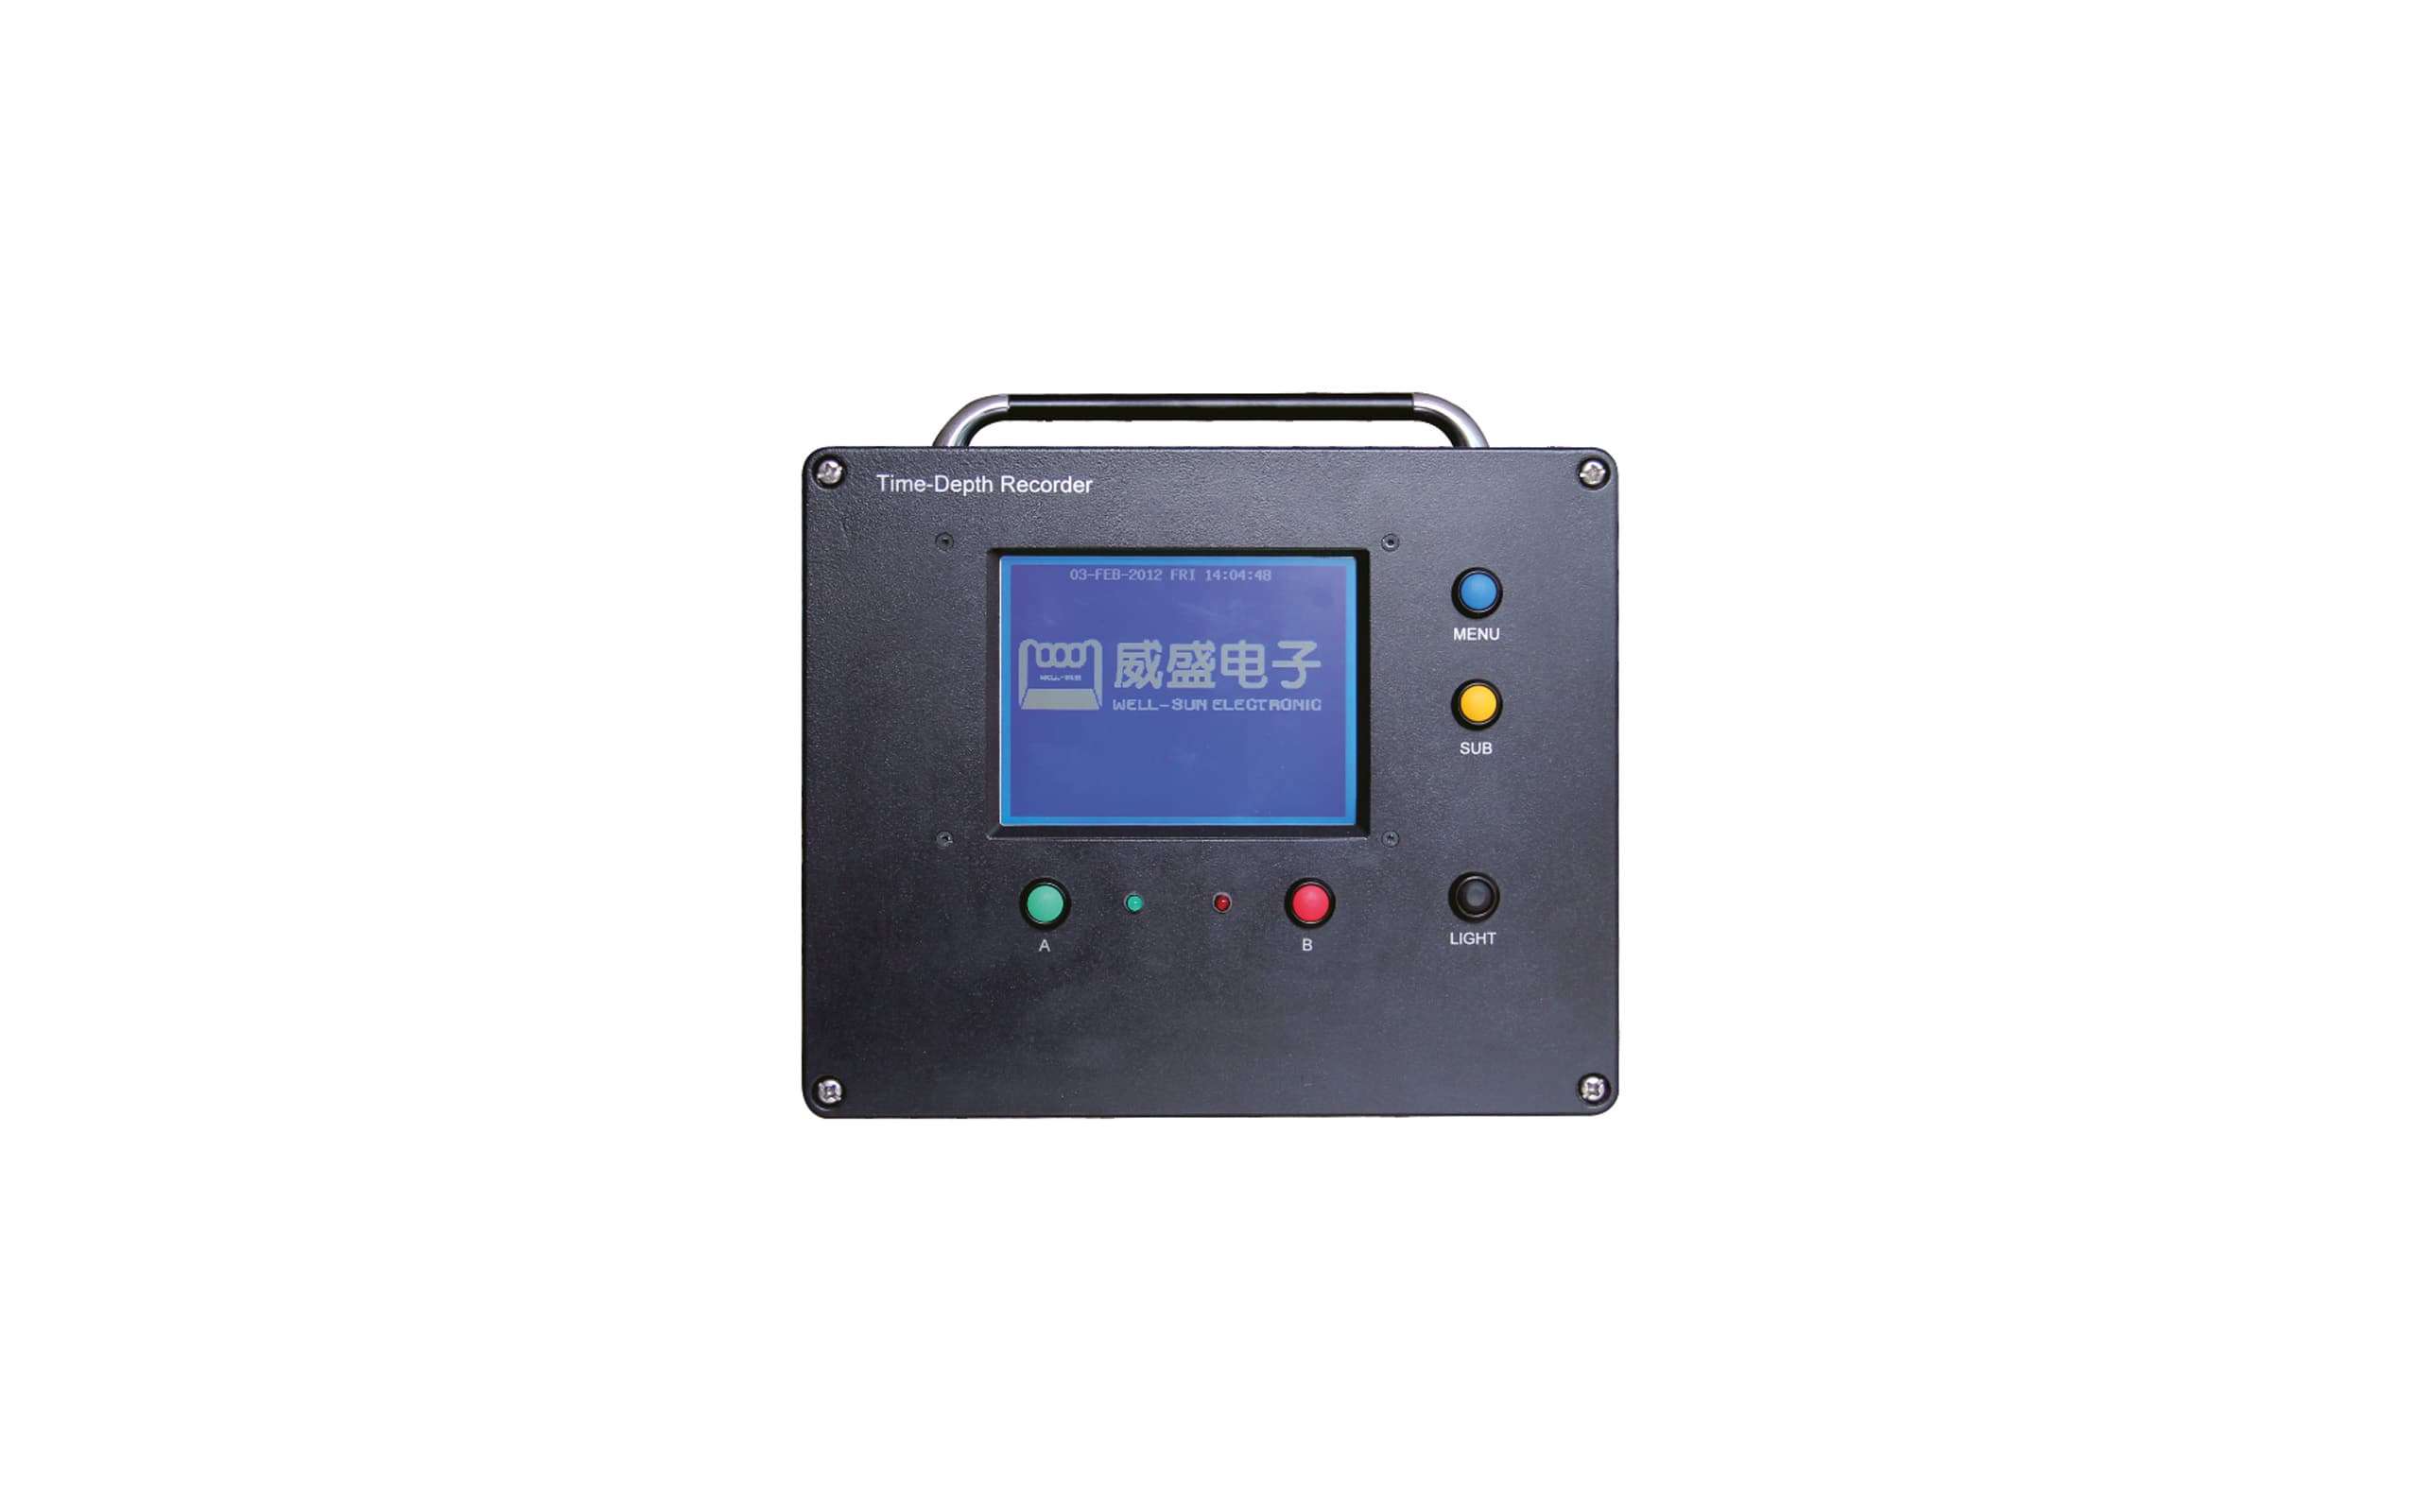 Time depth recorder - black box with screen and multi coloured buttons